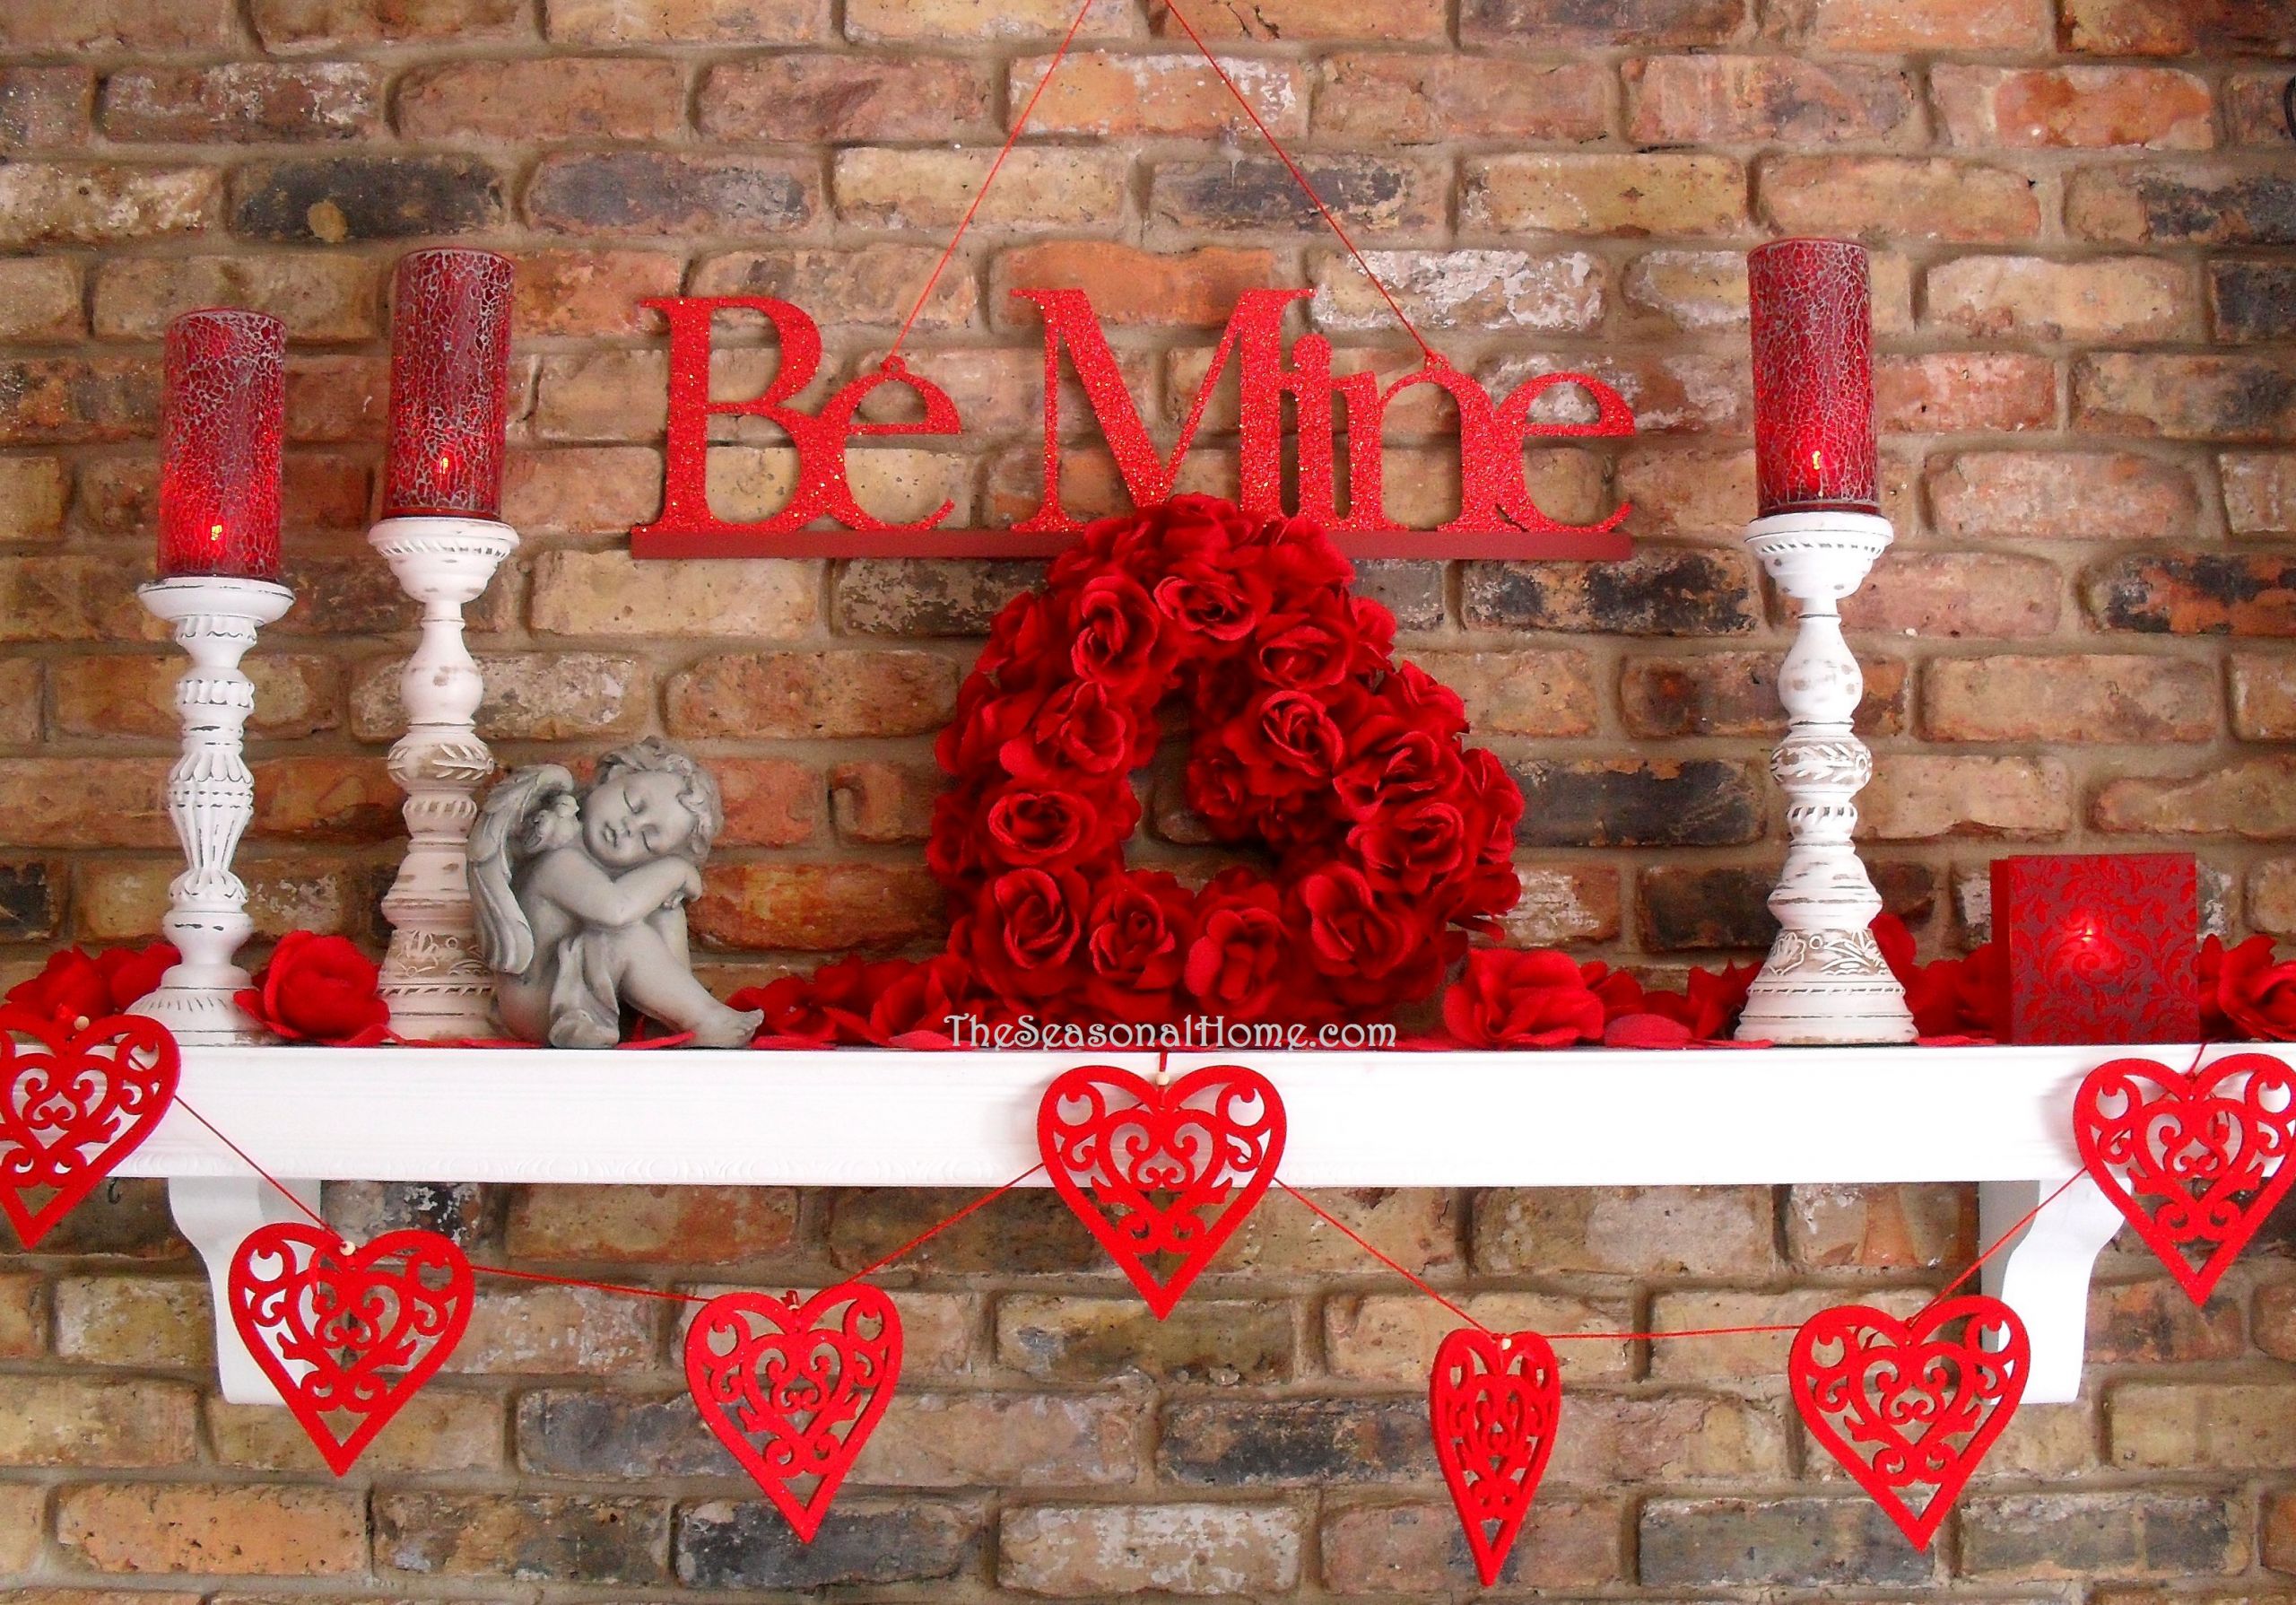 Valentines Day Pic Ideas
 Inexpensive Decorations for St Valentine’s Day The